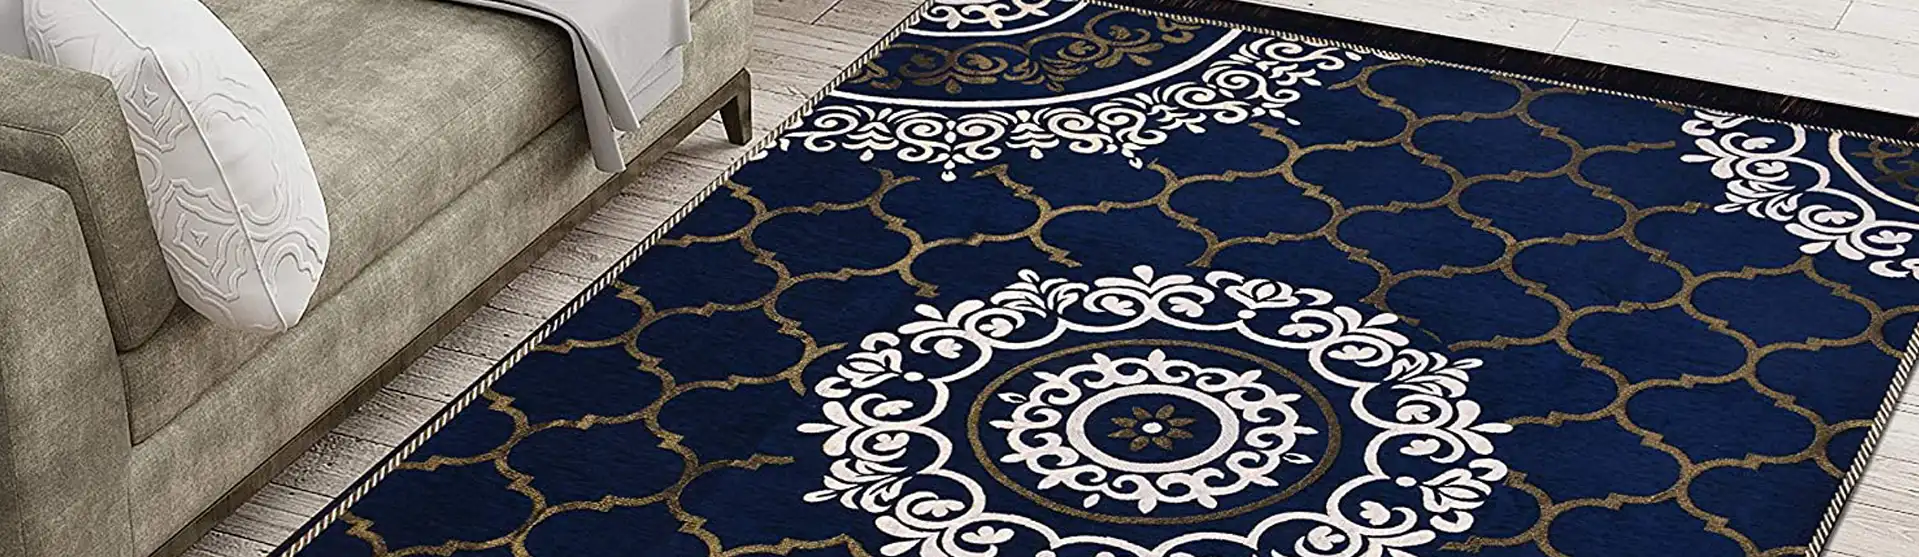 Oriental Rug Cleaning Service Company in Stuart